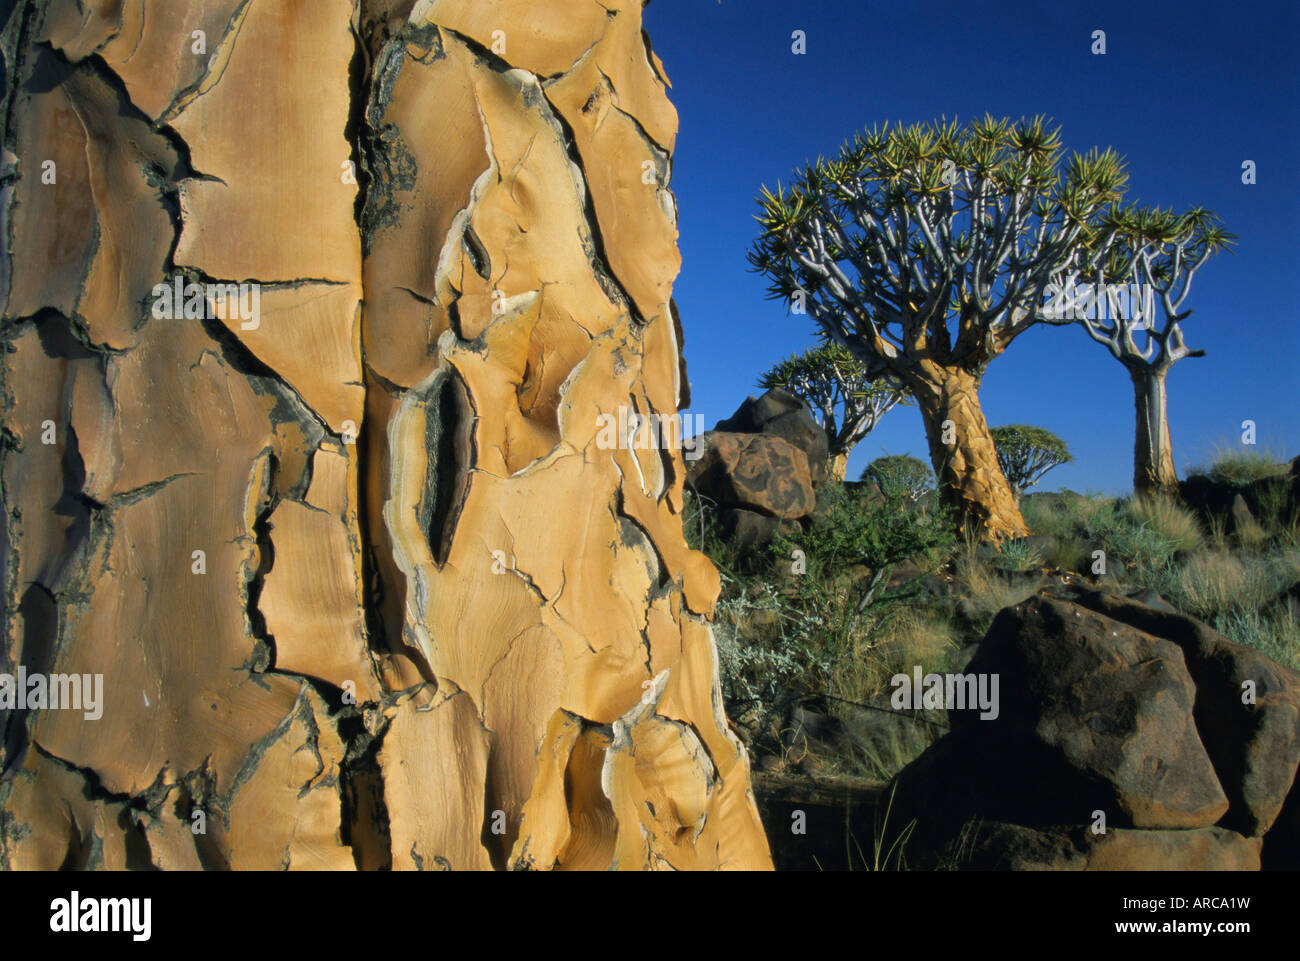 Quivertrees (kokerbooms) in the Quivertree Forest (Kokerboomwoud), near Keetmanshoop, Namibia, Africa Stock Photo